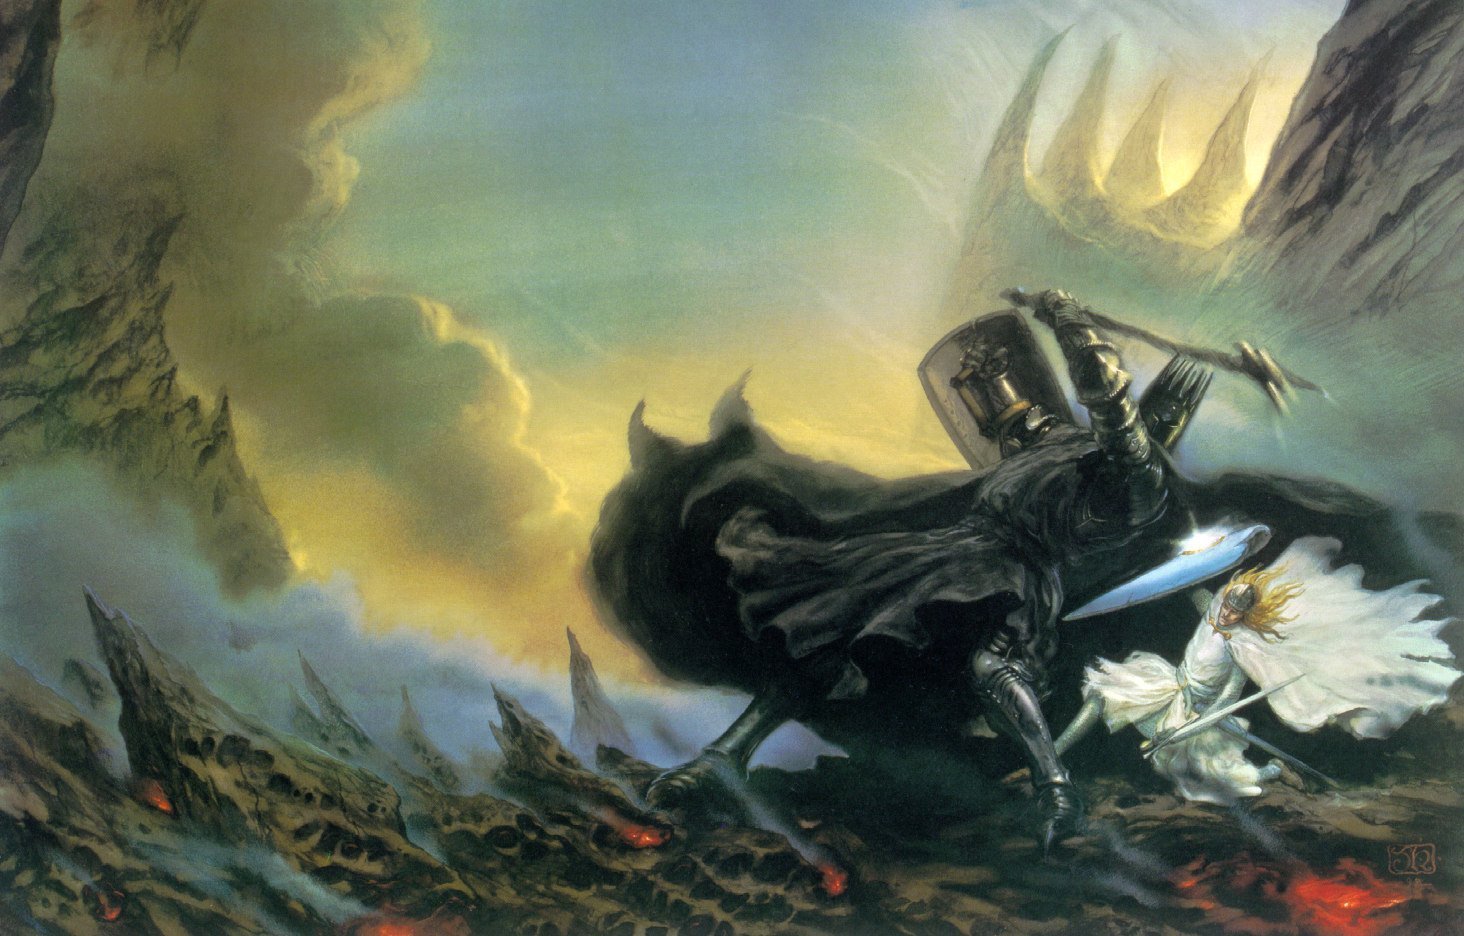 The fall of the numenor in jrr tolkiens fantasy novel